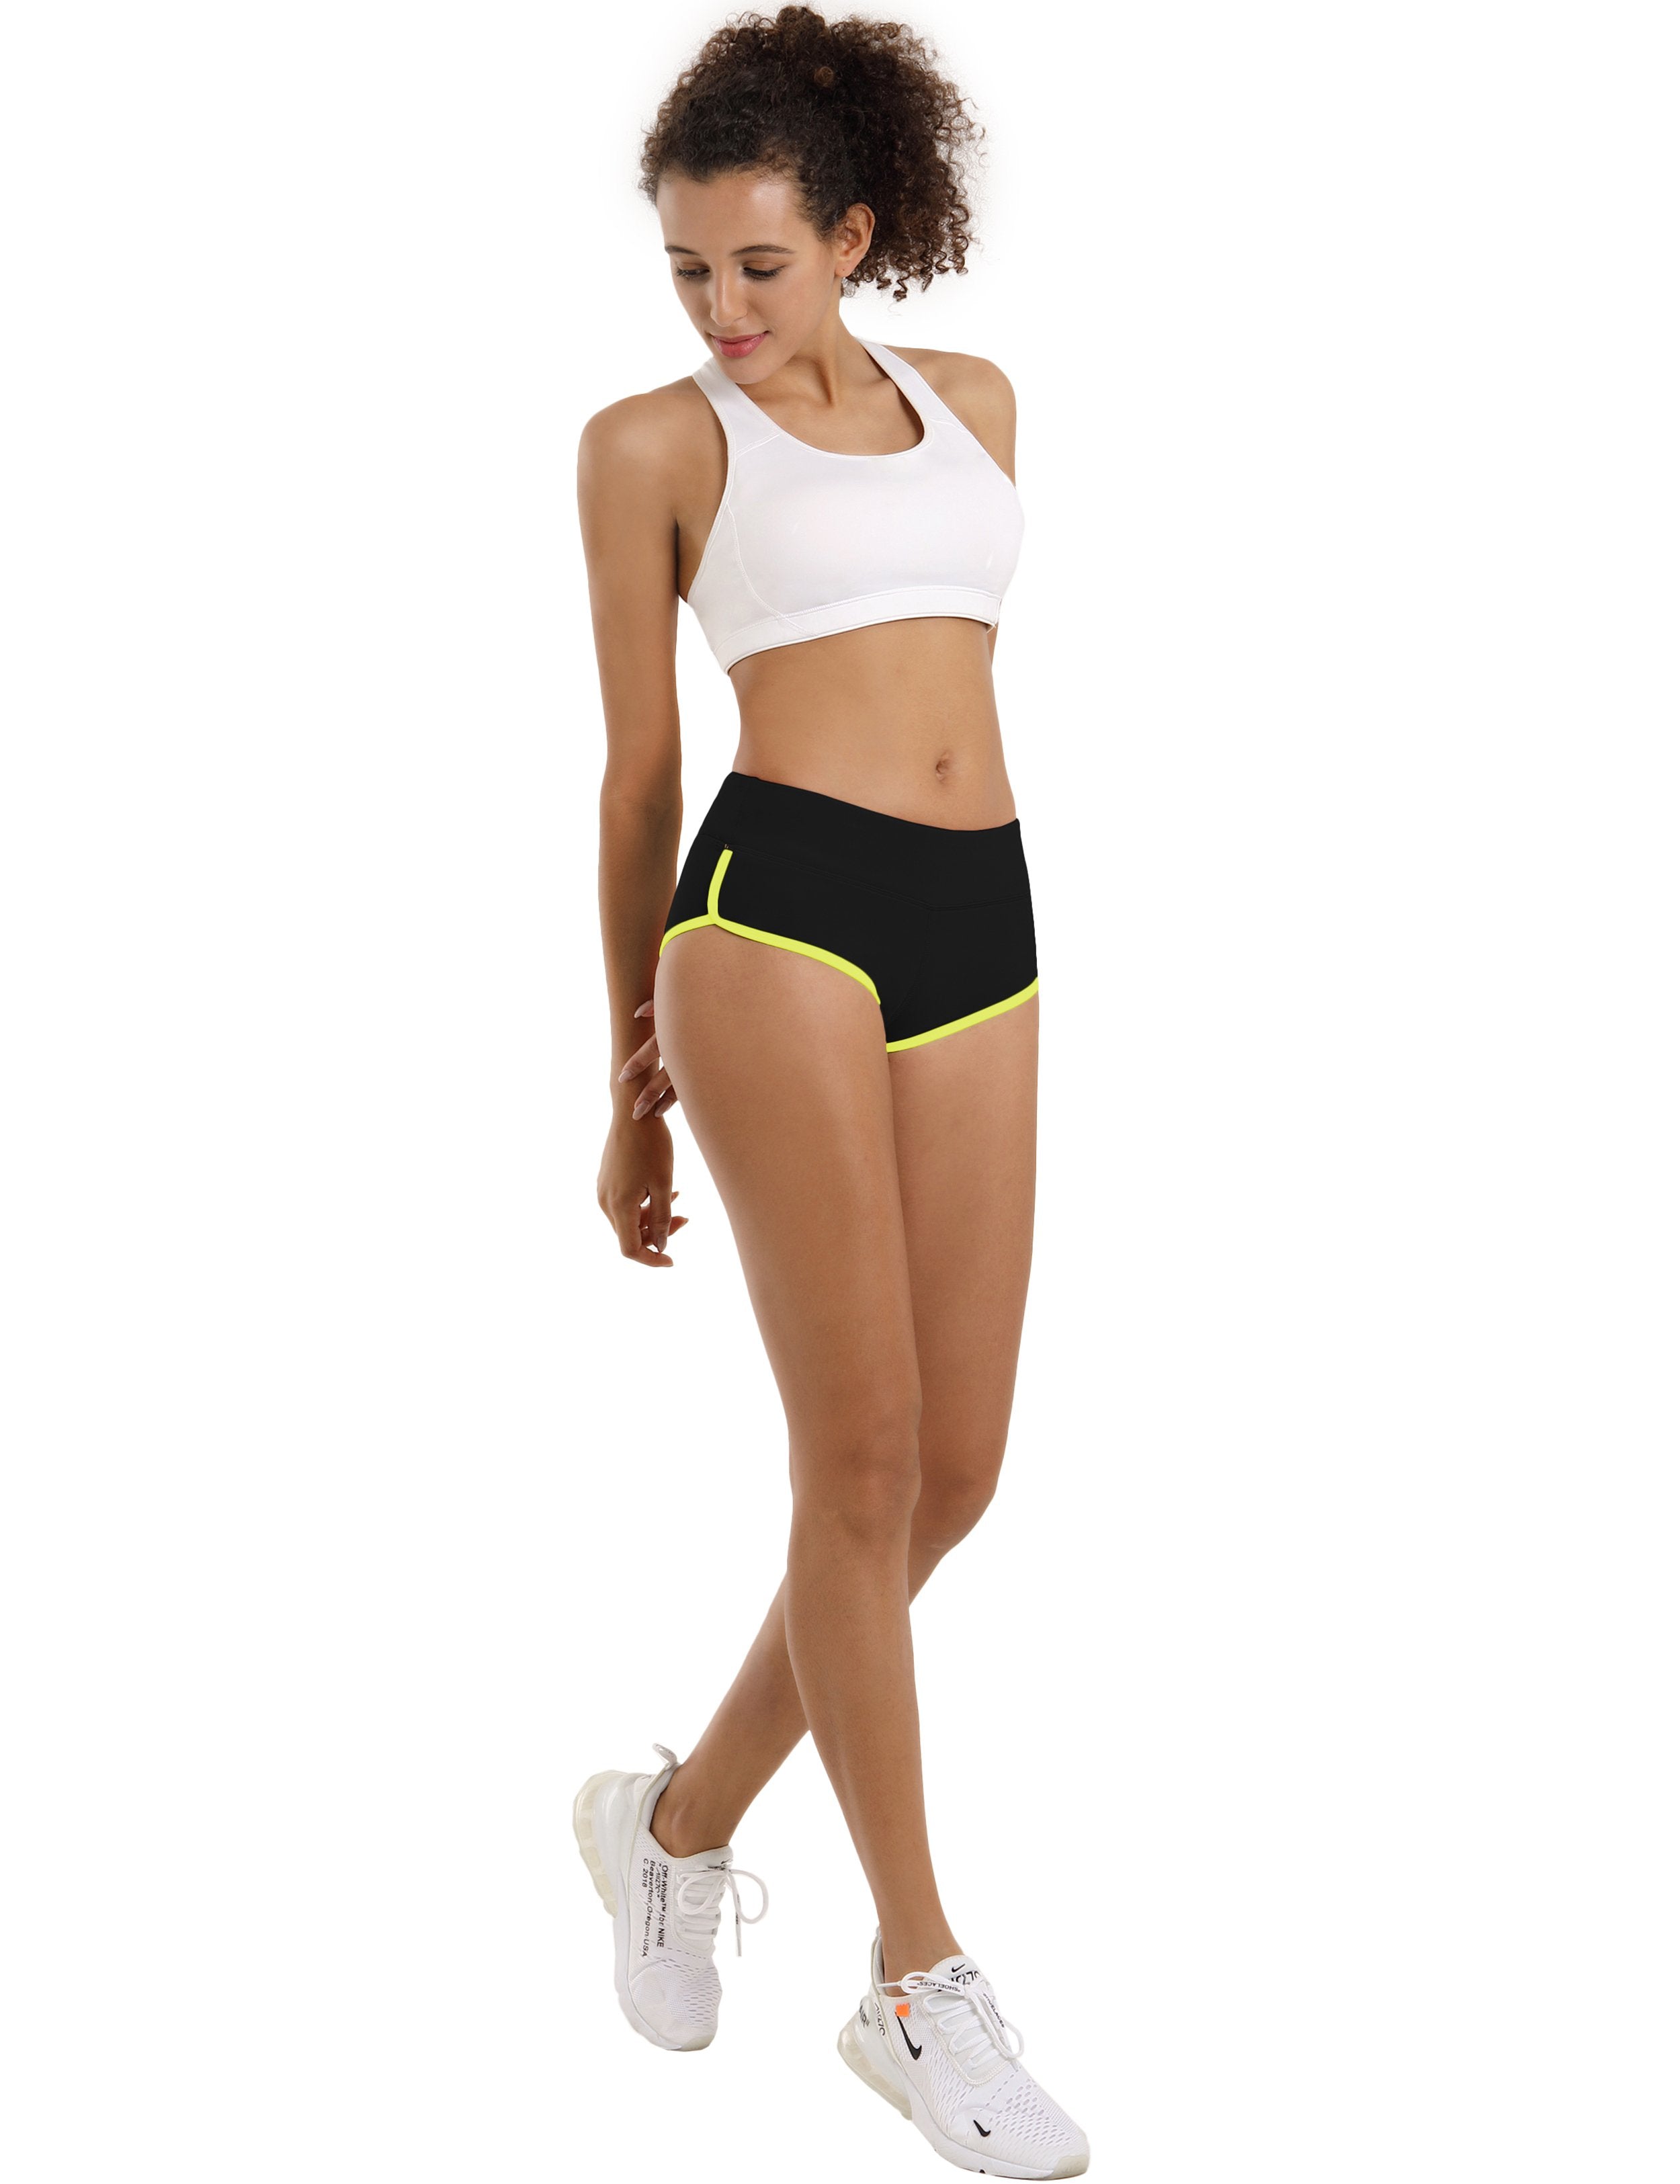 Sexy Booty Jogging Shorts black_fluorescentyellow Sleek, soft, smooth and totally comfortable: our newest sexy style is here. Softest-ever fabric High elasticity High density 4-way stretch Fabric doesn't attract lint easily No see-through Moisture-wicking Machine wash 75%Nylon/25%Spandex